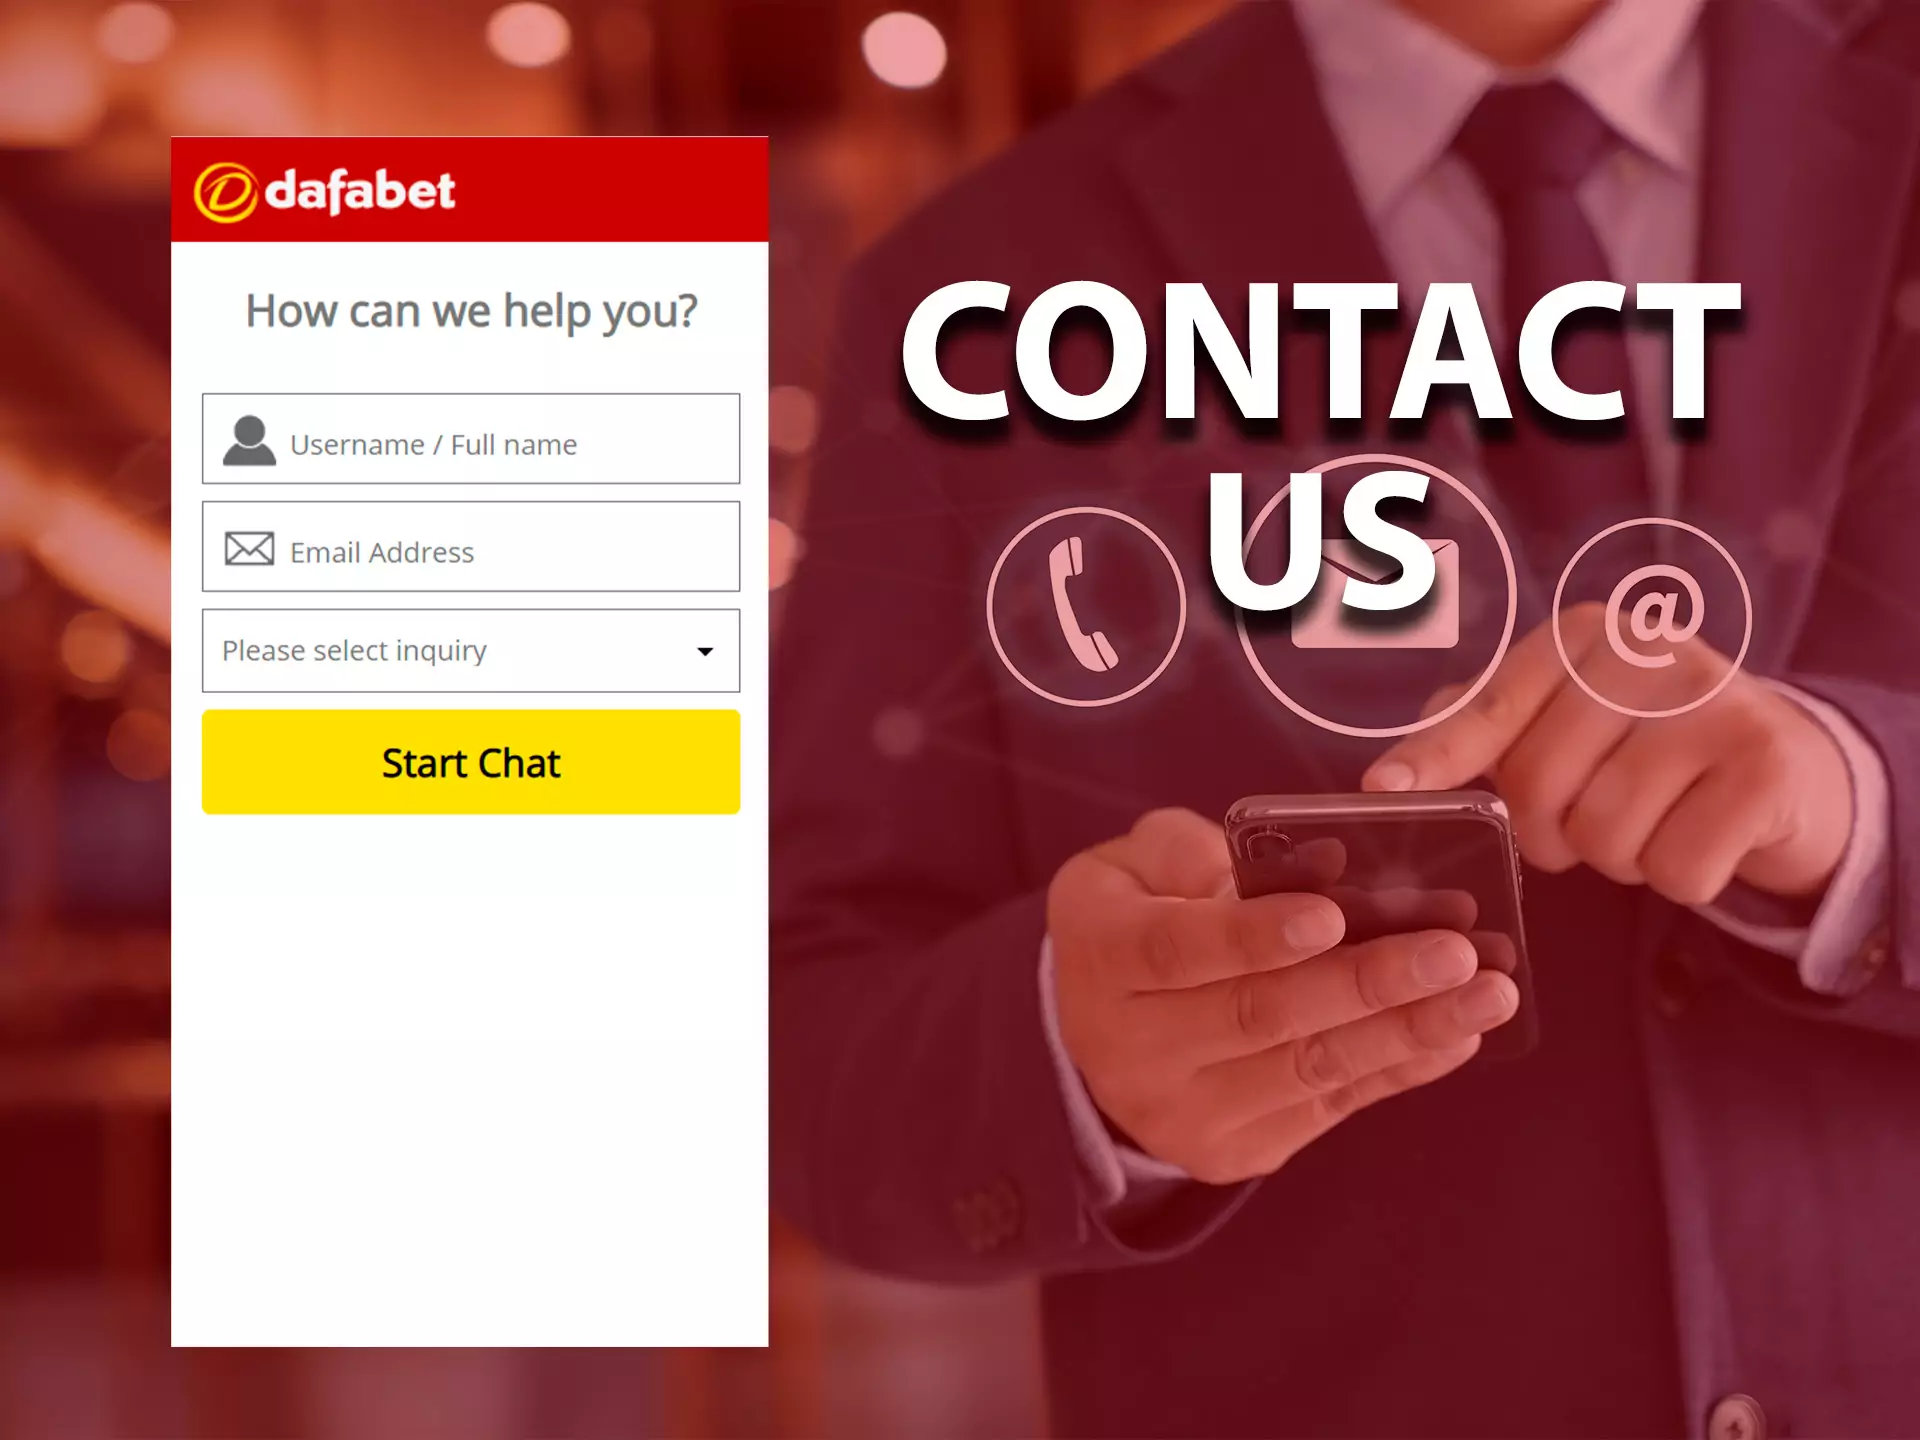 You can contact the Dafabet support team 24/7.